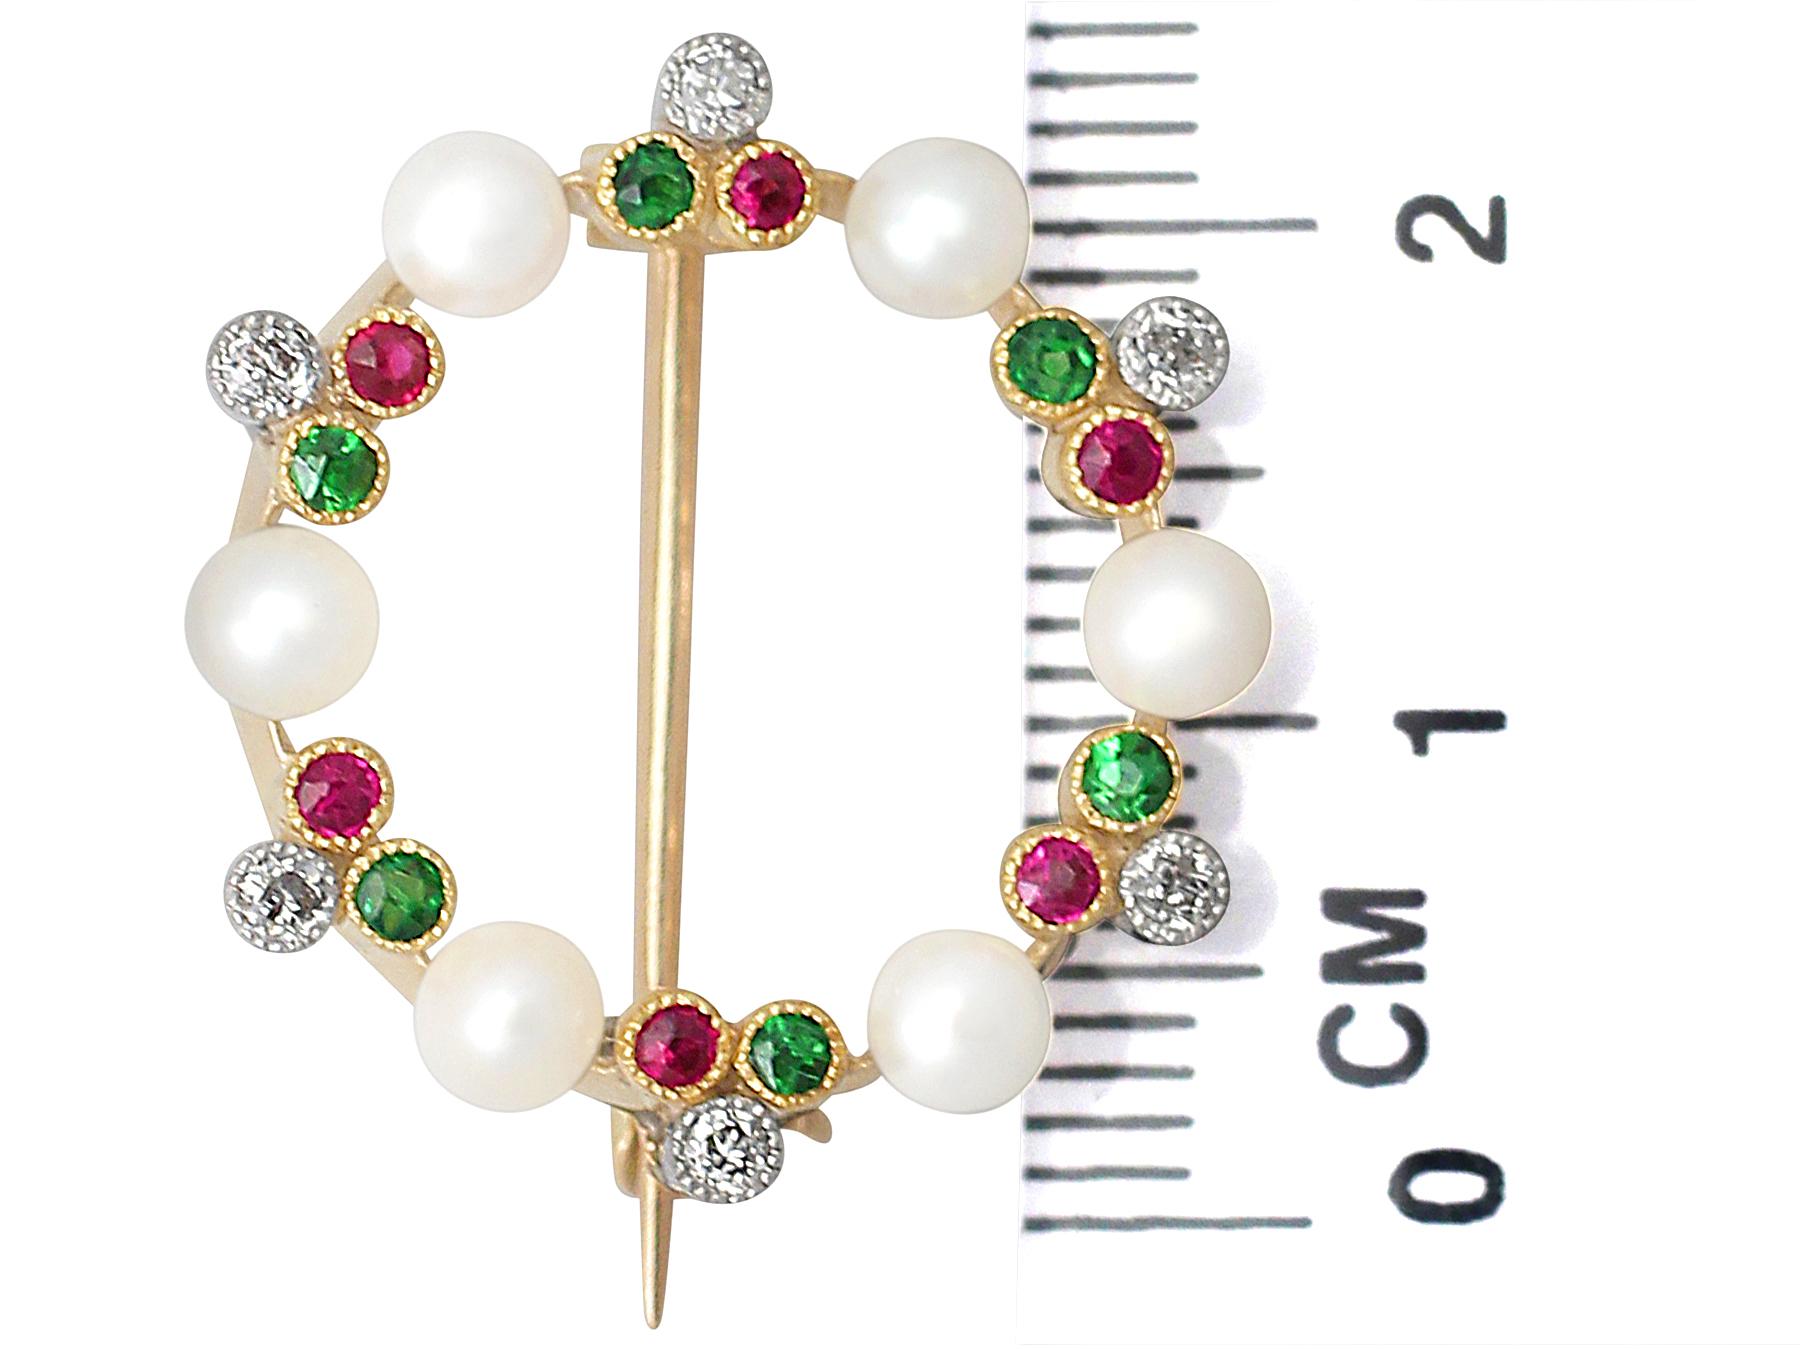 Antique 1910s Pearl Diamond Peridot and Ruby Yellow Gold Brooch In Excellent Condition For Sale In Jesmond, Newcastle Upon Tyne